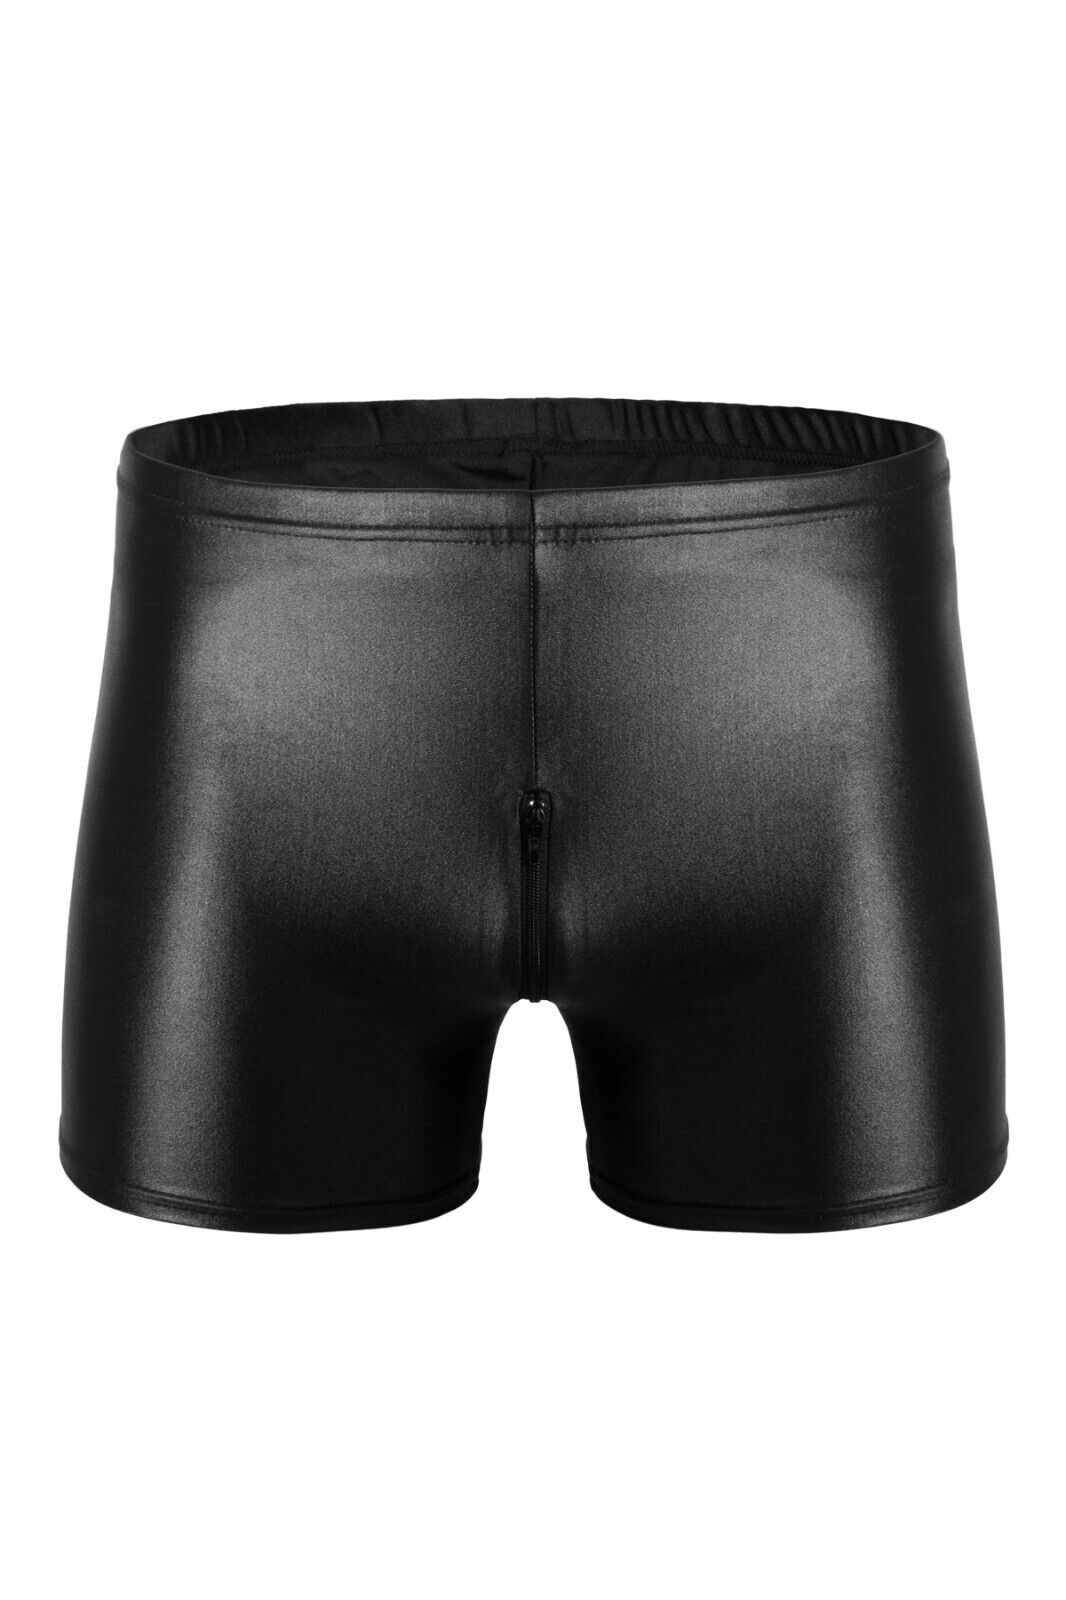 Mens Wet Look Hotpant Step-RV Stretch Shiny Strong Shiny Stretch